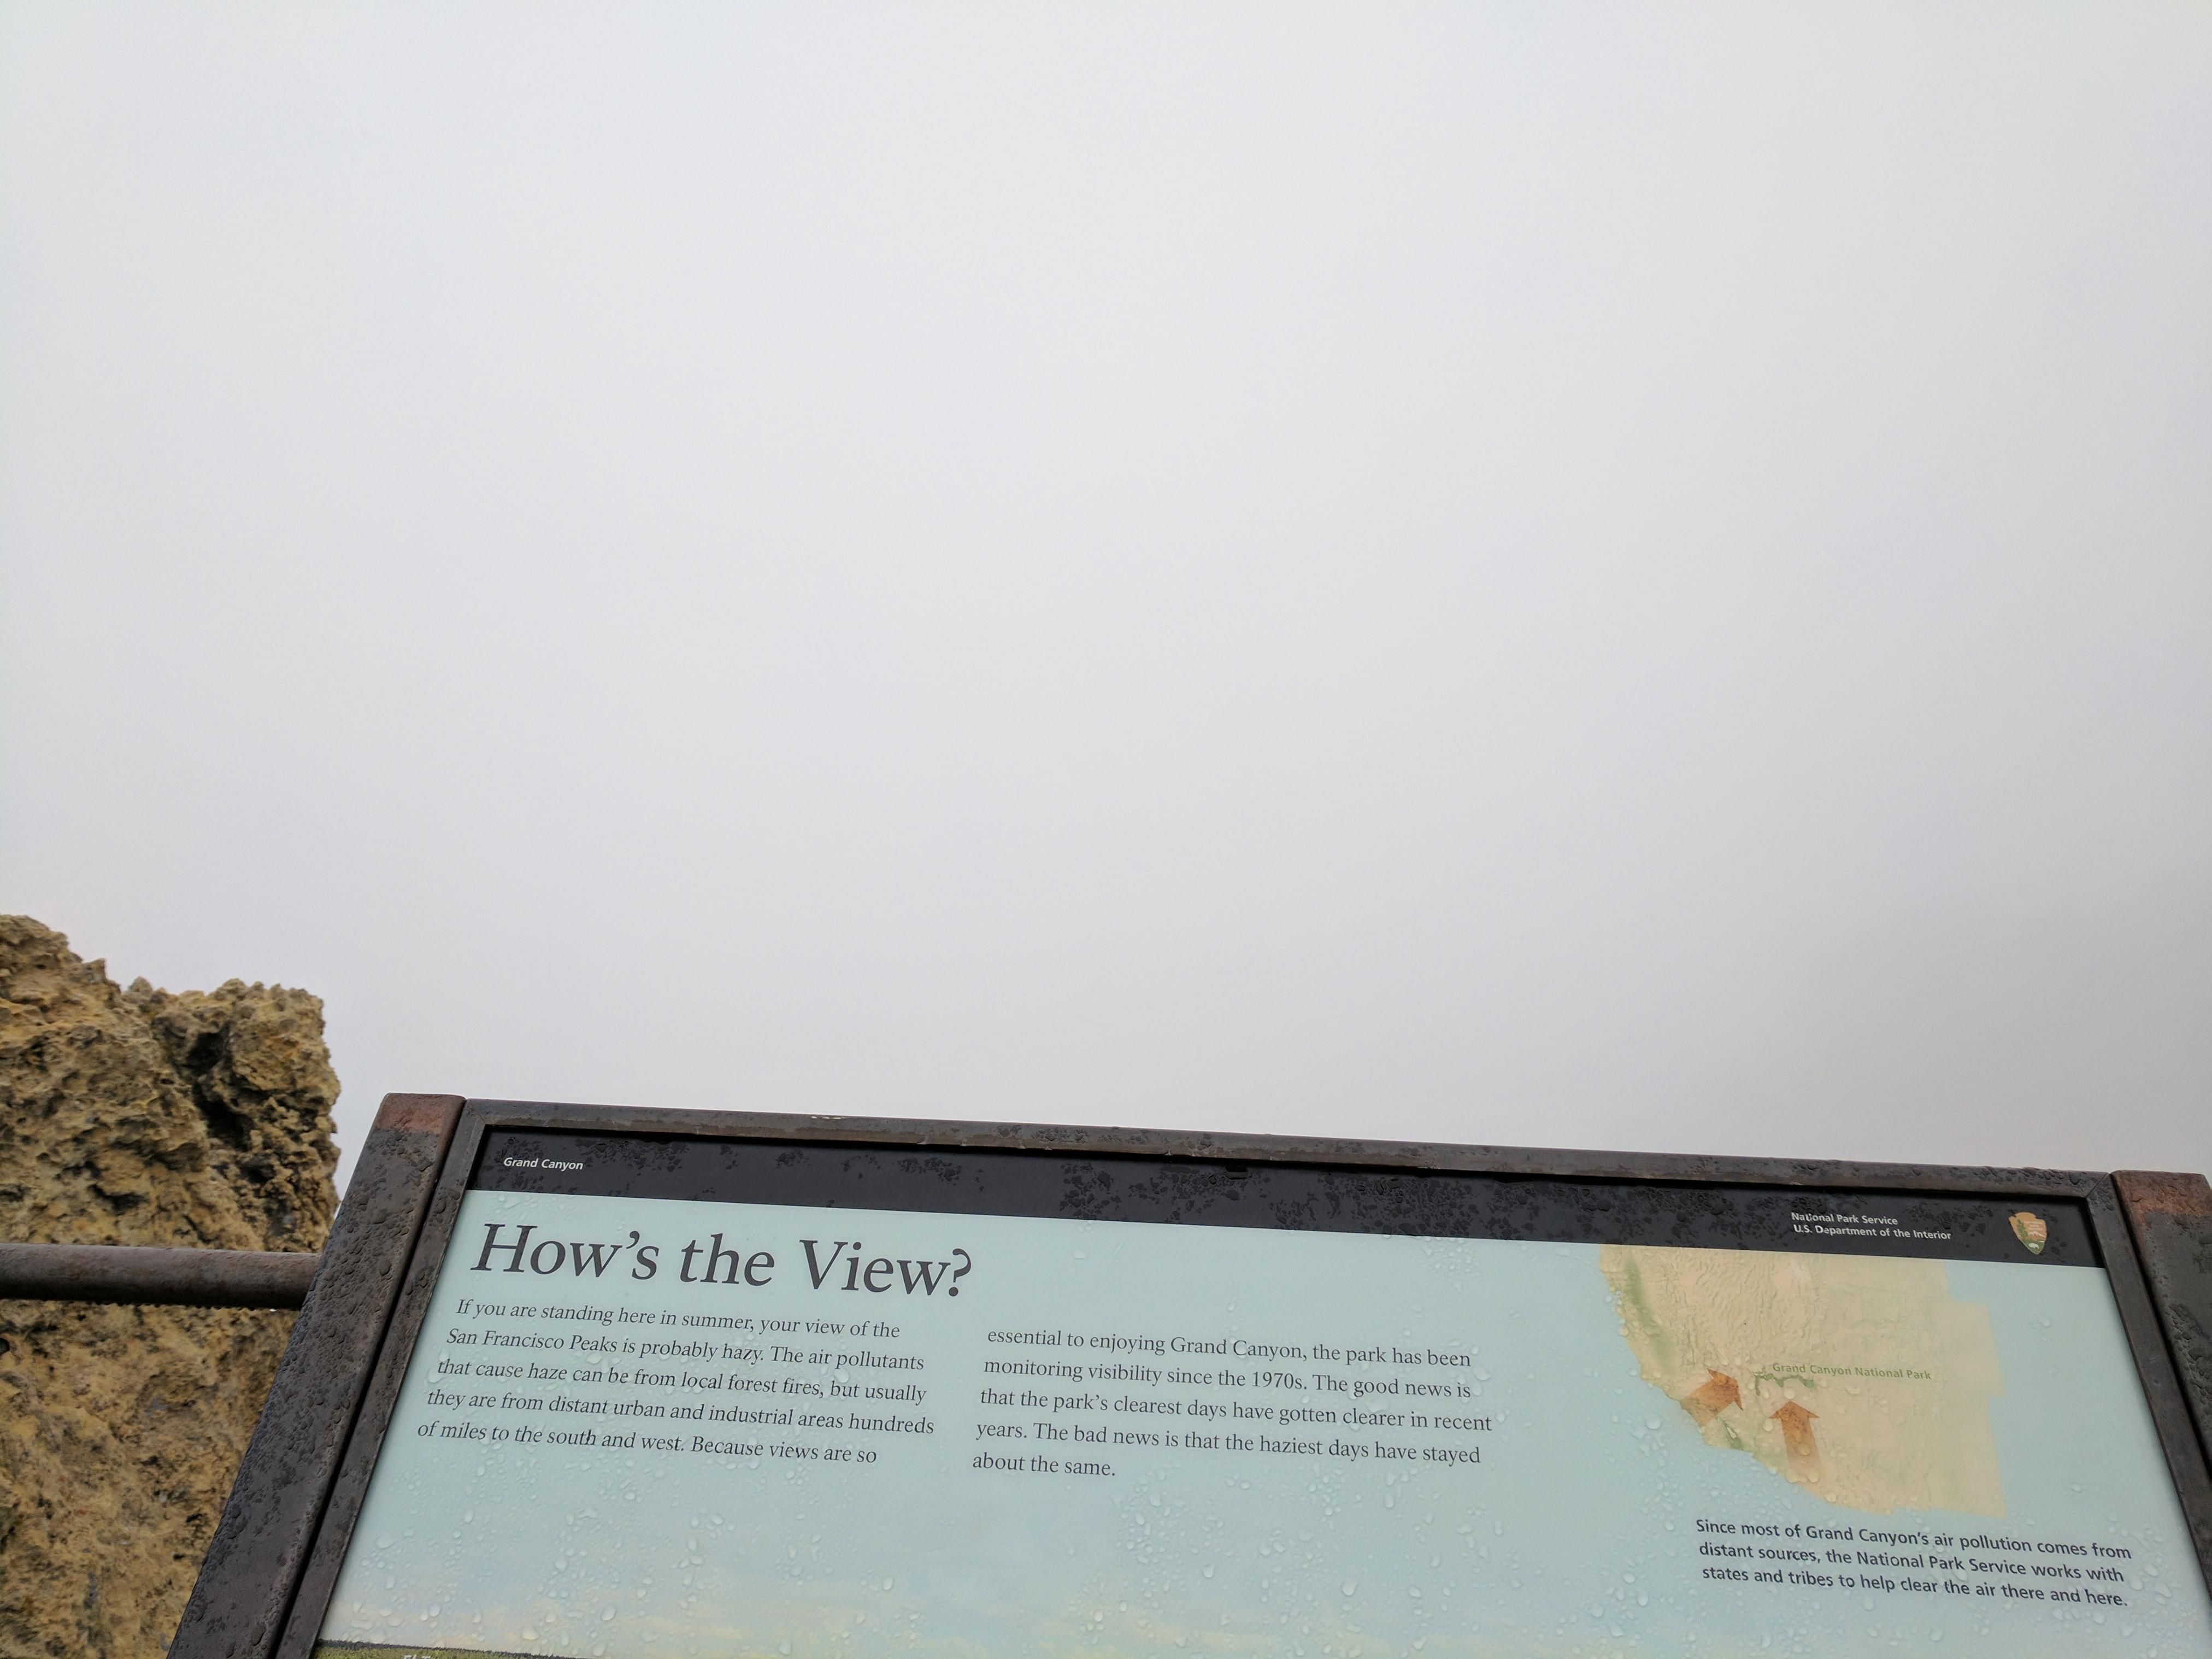 Go to the Grand Canyon they said, enjoy the view they said.